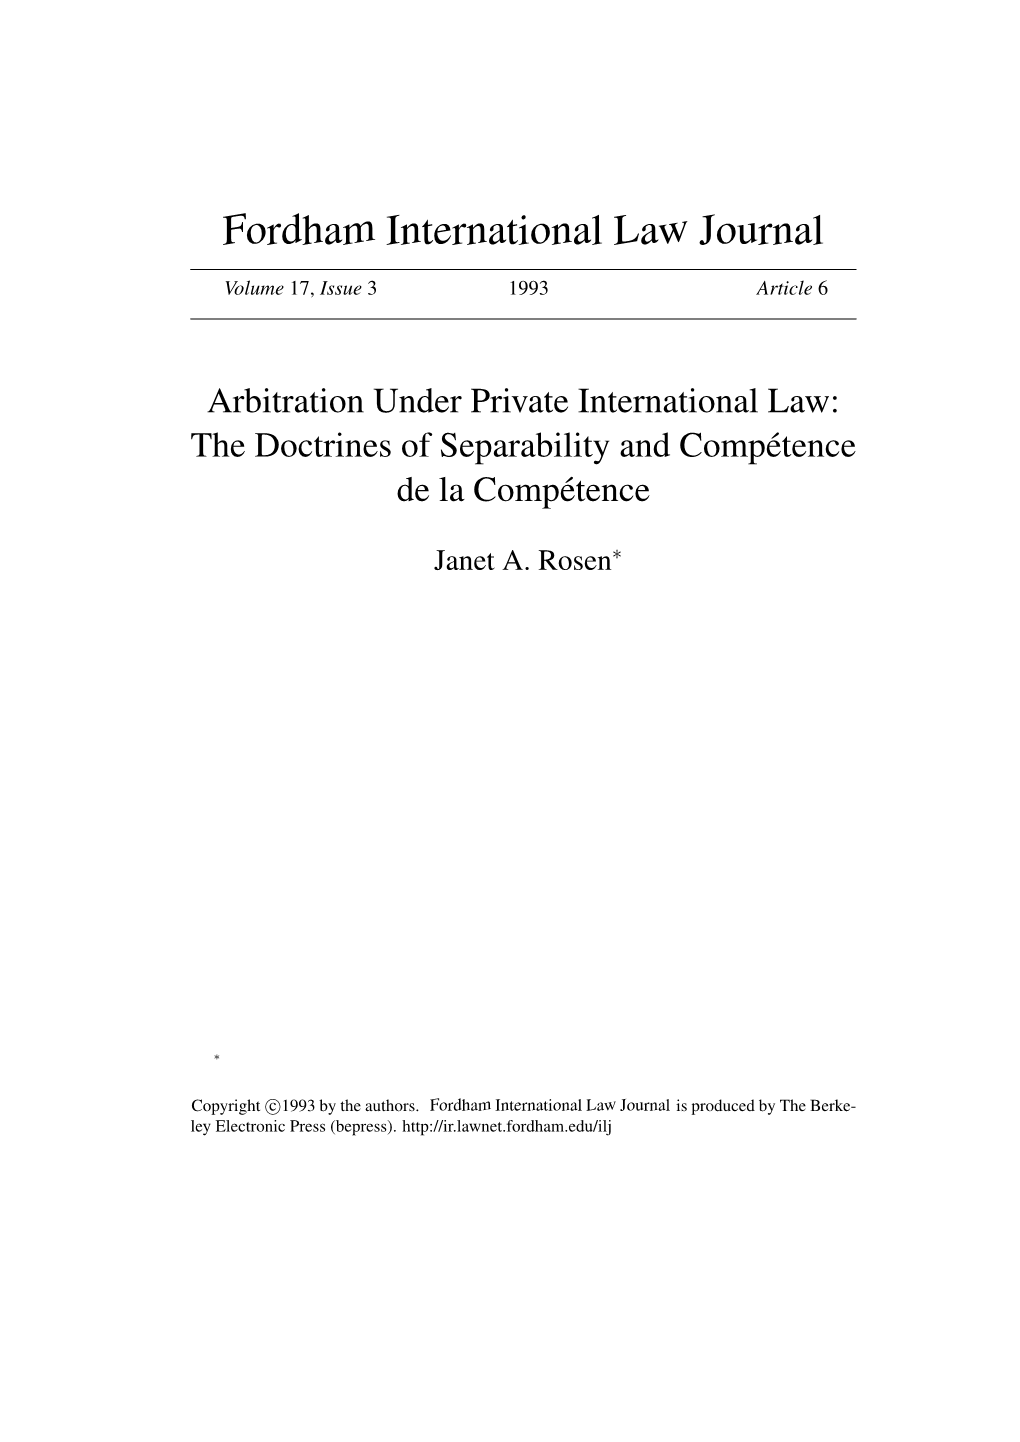 Arbitration Under Private International Law: the Doctrines of Separability and Competence´ De La Competence´